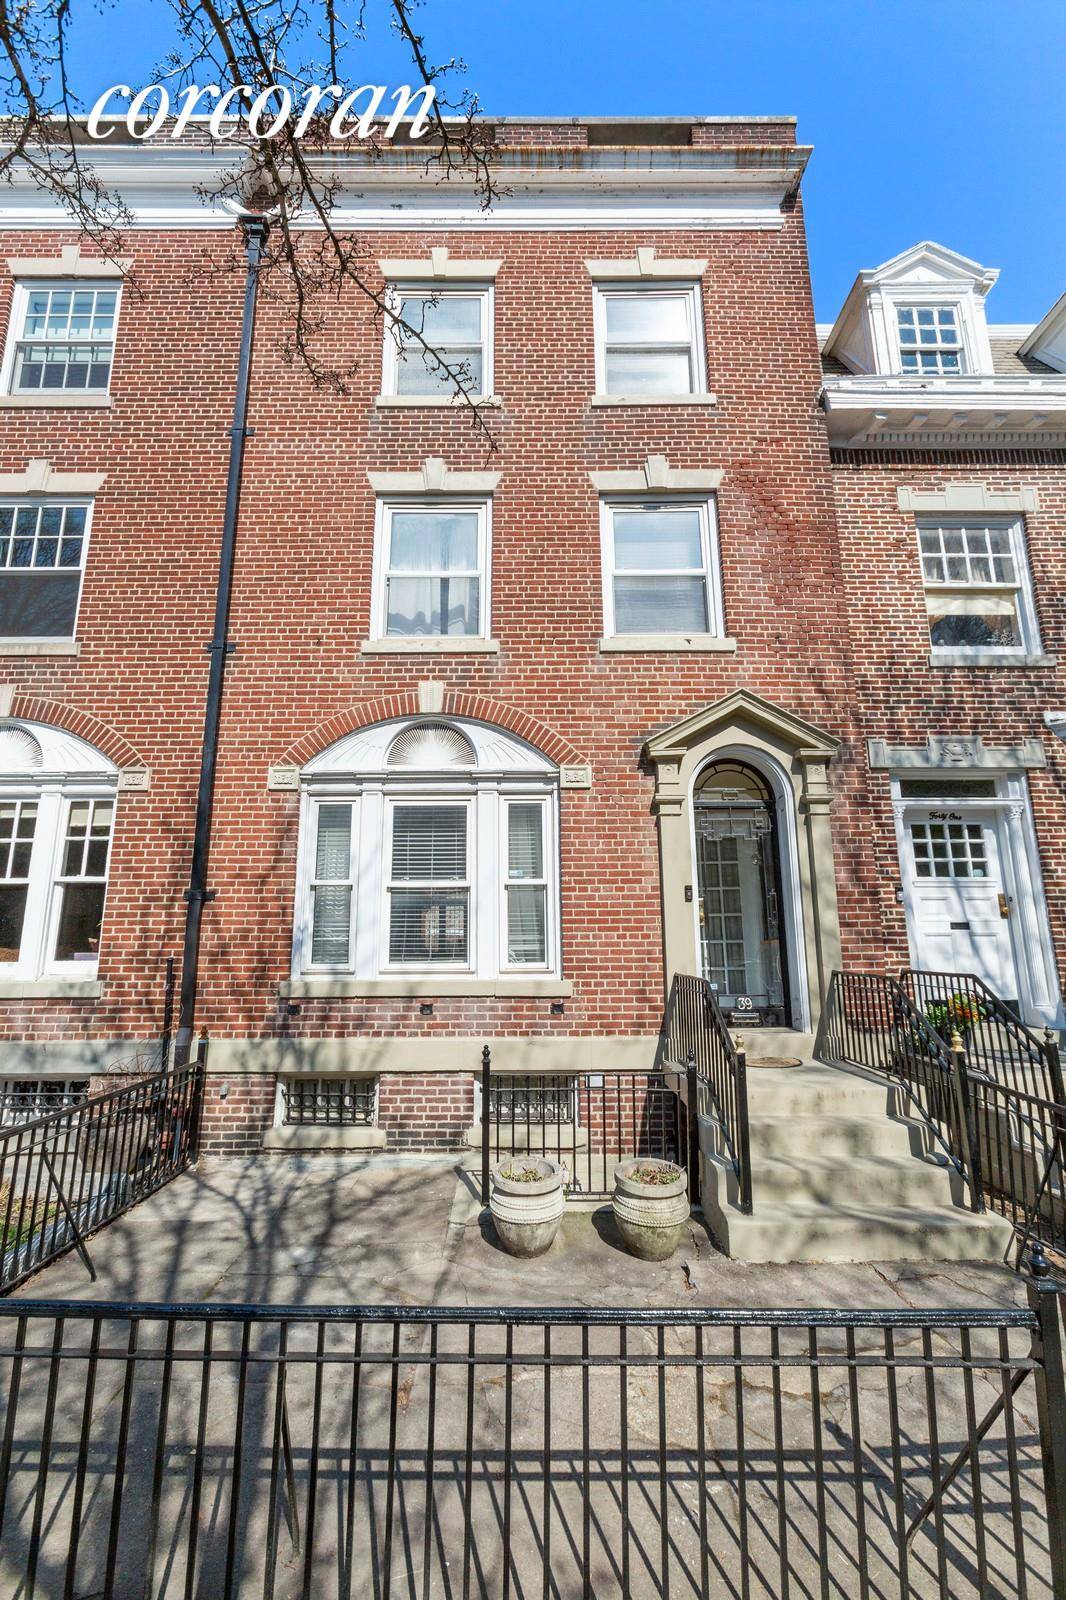 Welcome to 39 Midwood street in Lefferts Manor Historic District, Federal style home for sale that is distinguished by its modesty in scale and architectural ornament.